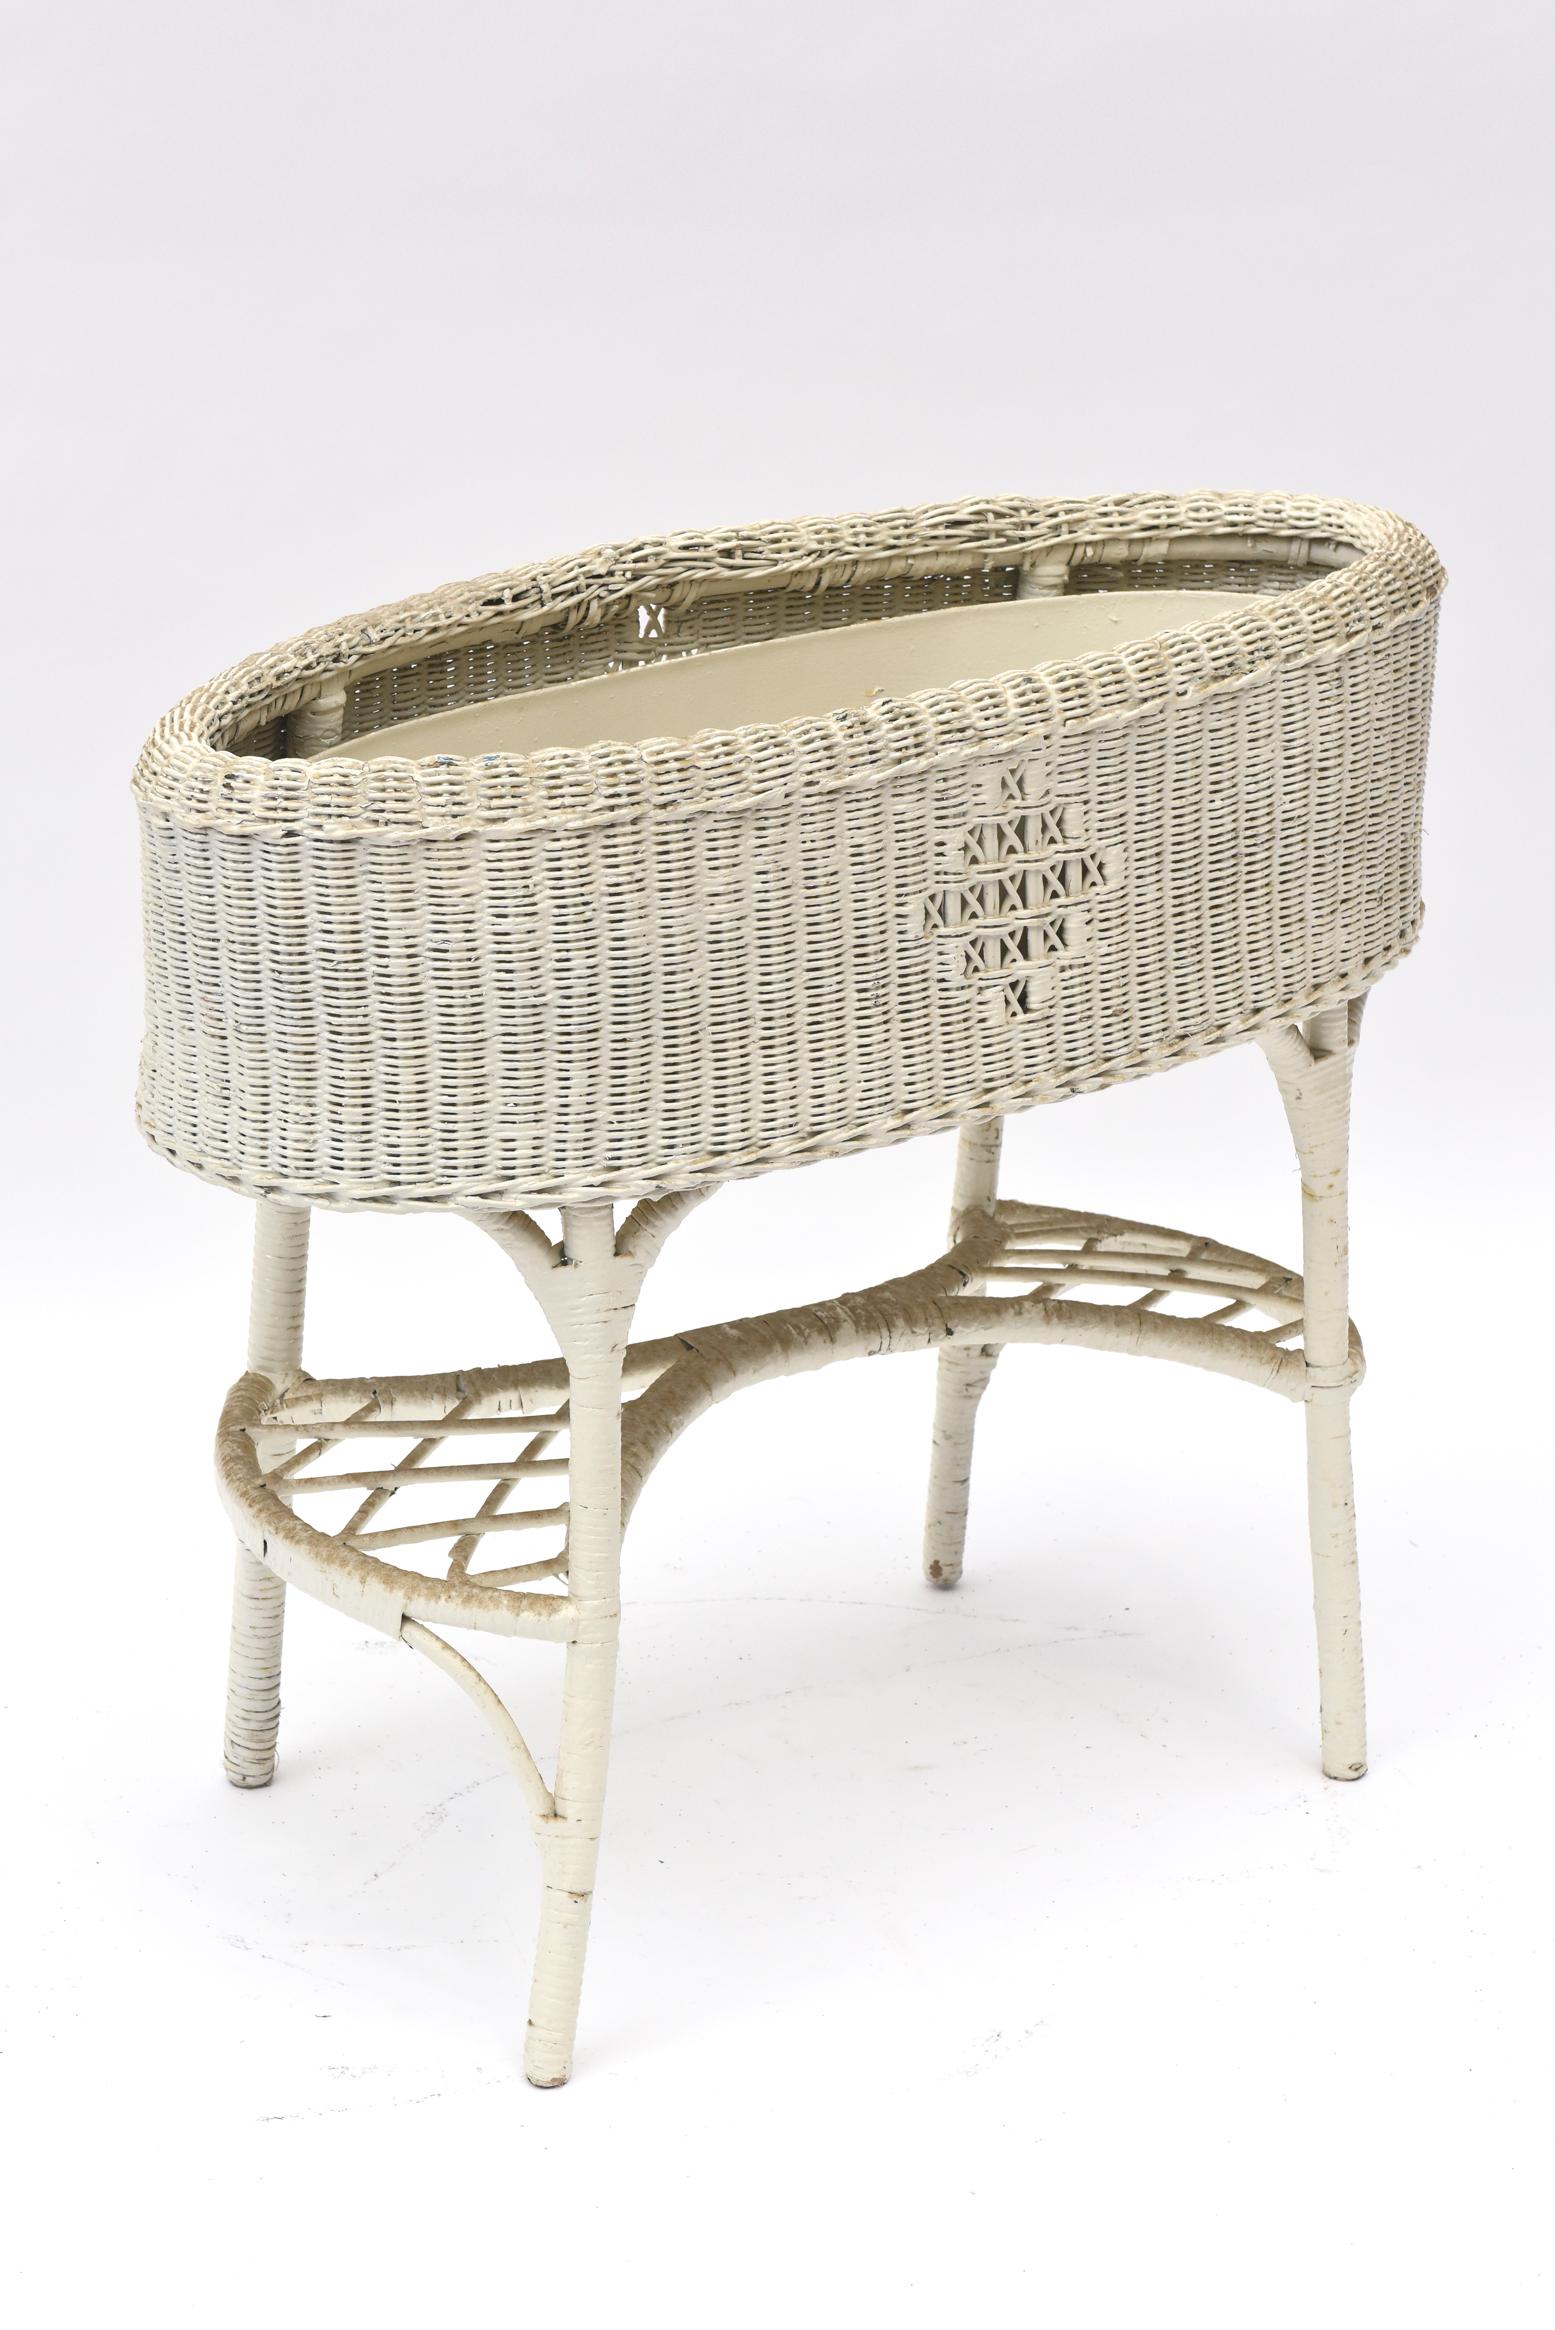 This lovely tightly woven wicker plant stand has an openwork pattern on the sides and an open lattice stretcher beneath which widens on each side to hold a potted plant or perhaps a watering can. A tin liner sits inside to protect the wicker while